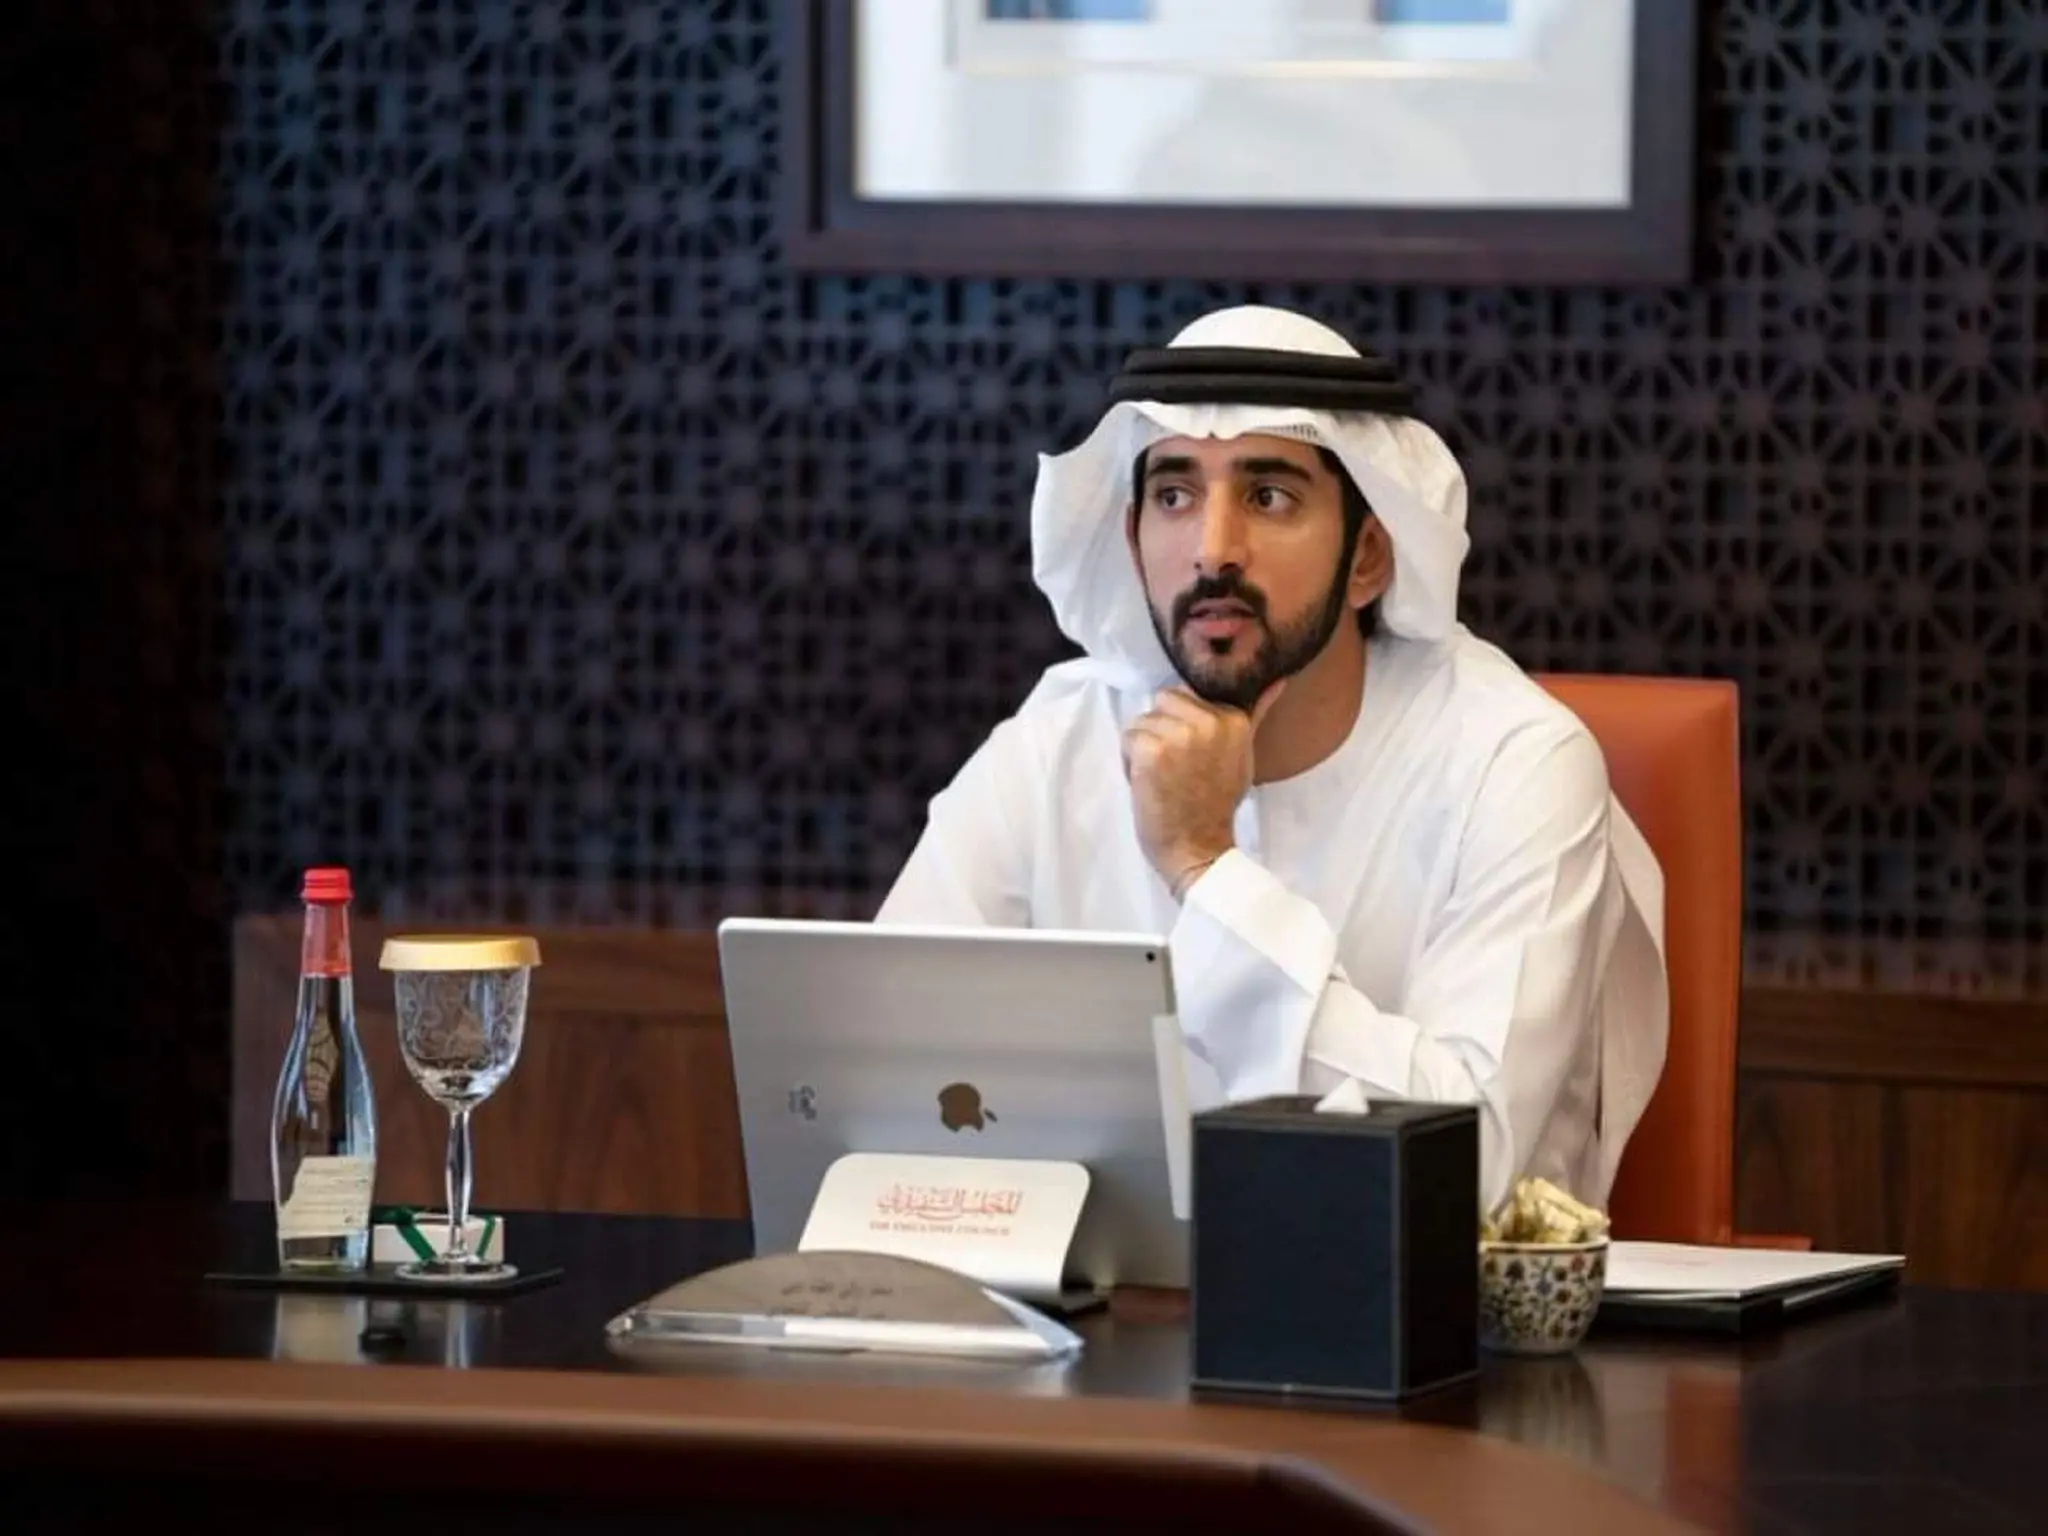 Urgent Dubai Government: Remote work will continue on Tuesday